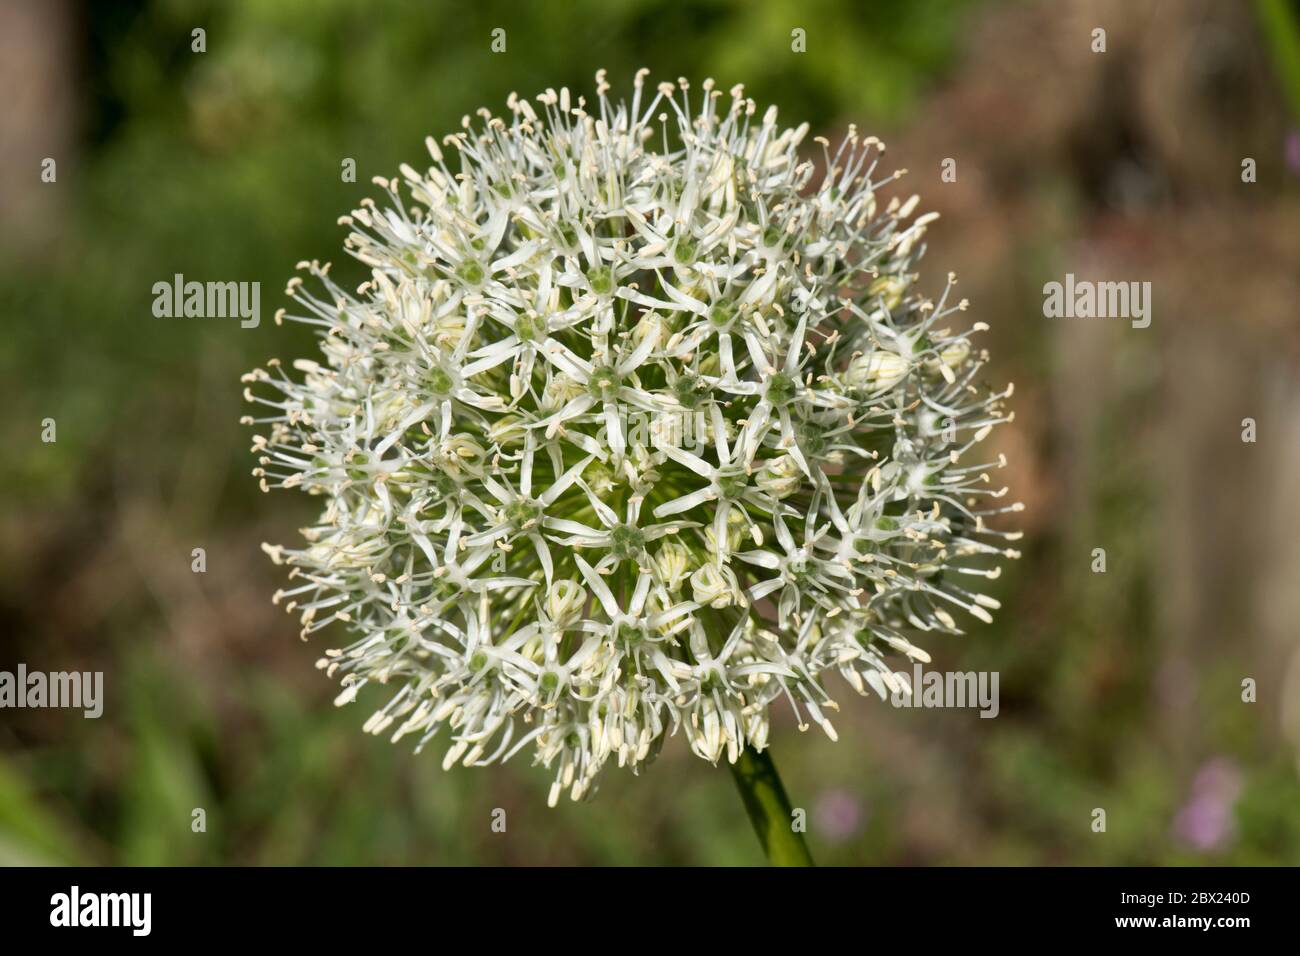 Allium stipitatum 'Mount Everest' sphericical white crowded umbel of small flowers in late spring, May, Berkshire Stock Photo